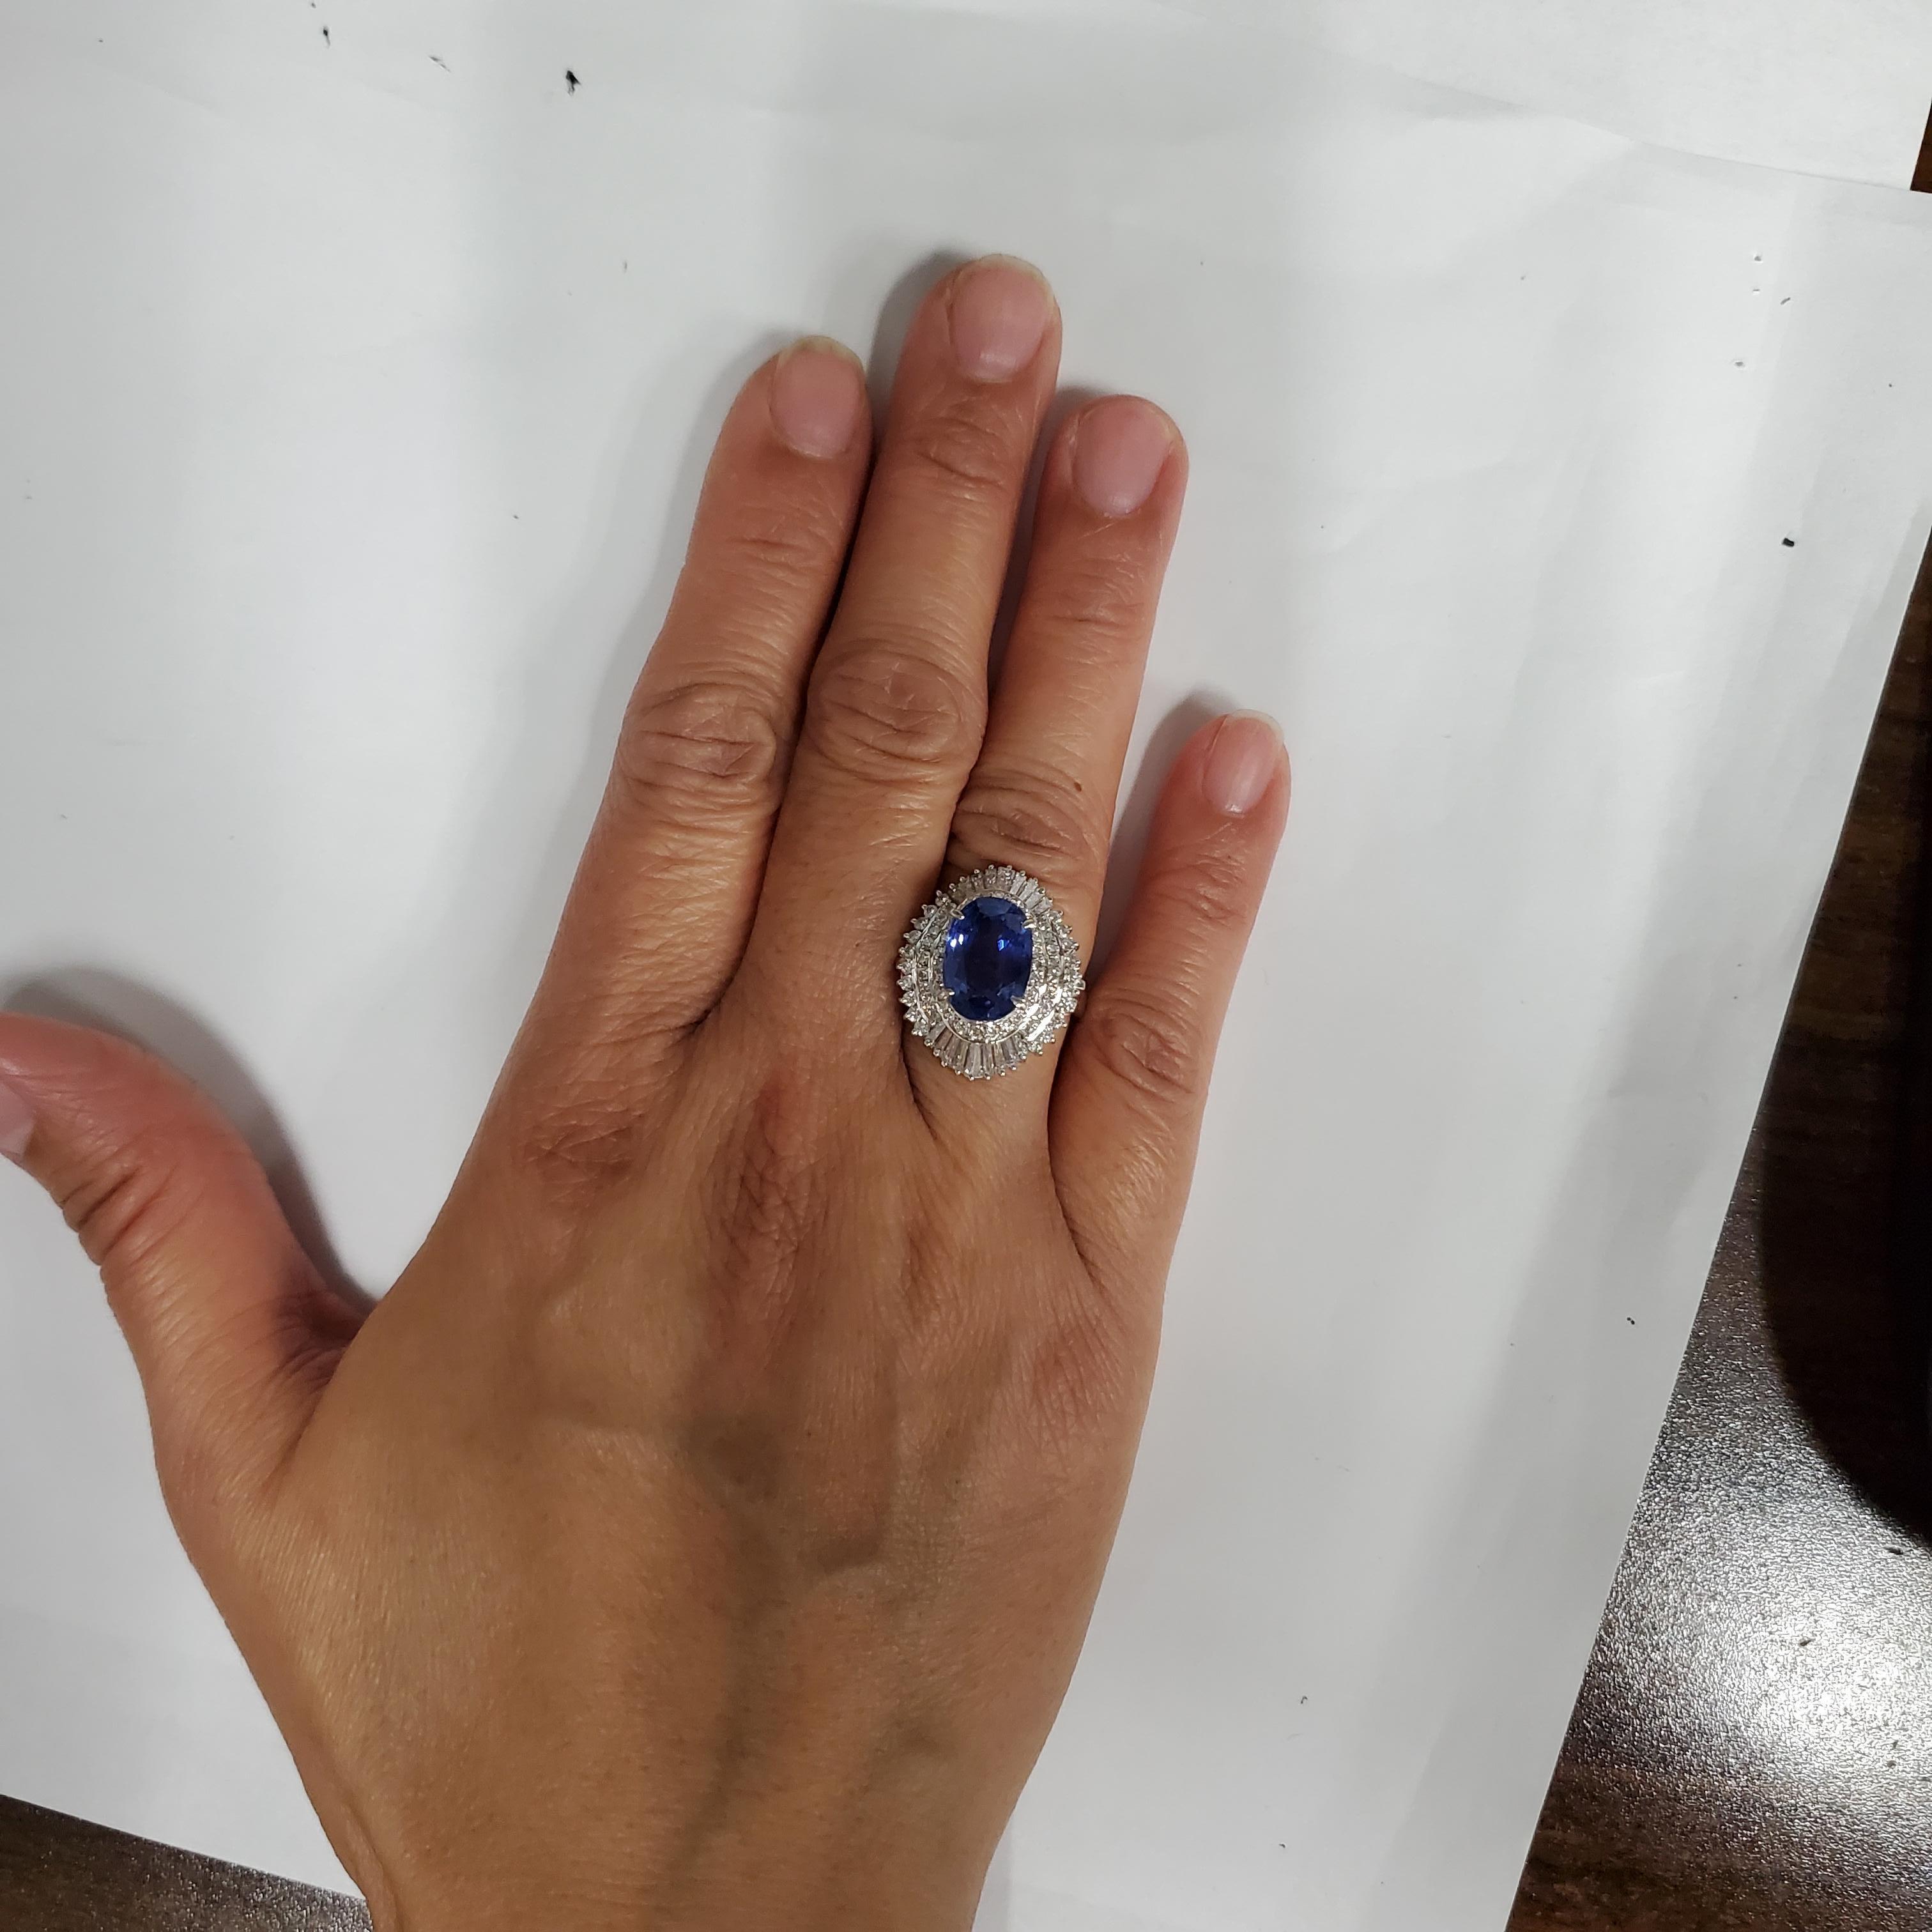 Gorgeous deep blue color unheated Sri Lanka blue sapphire oval weighing 5.18 ct. with 1.62 ct. good quality, white, and bright diamond rounds and baguettes.  Handmade platinum mounting in size 6.25.  Comes with GIA certificate.